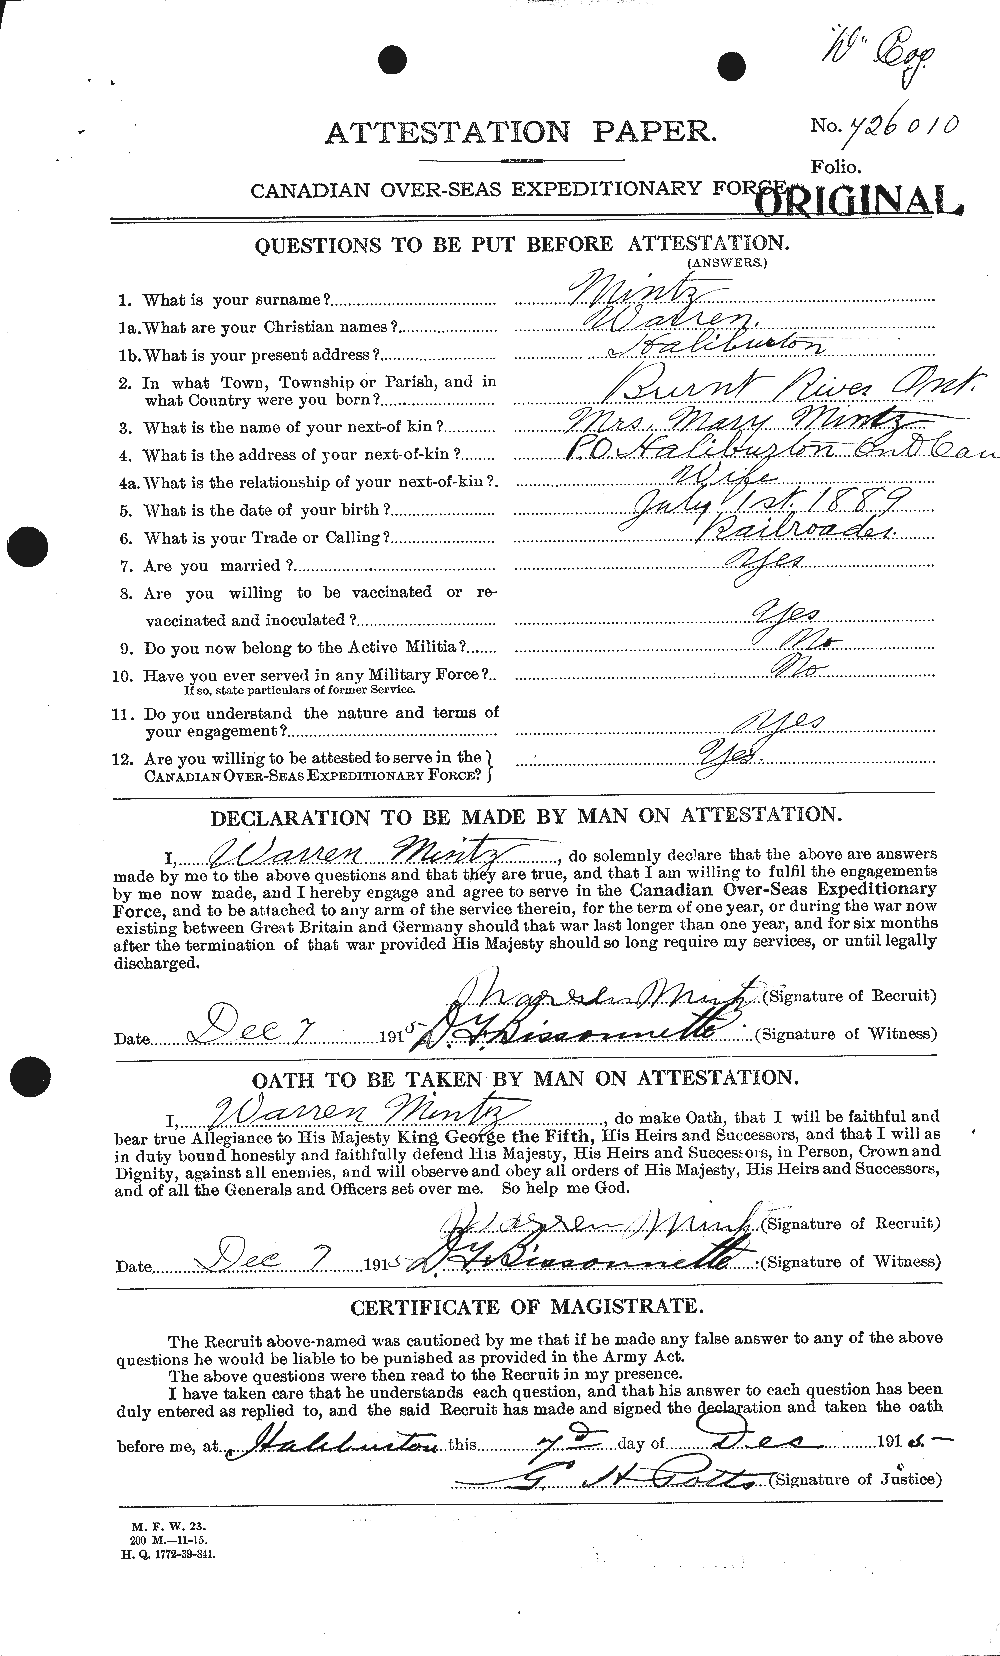 Personnel Records of the First World War - CEF 501072a